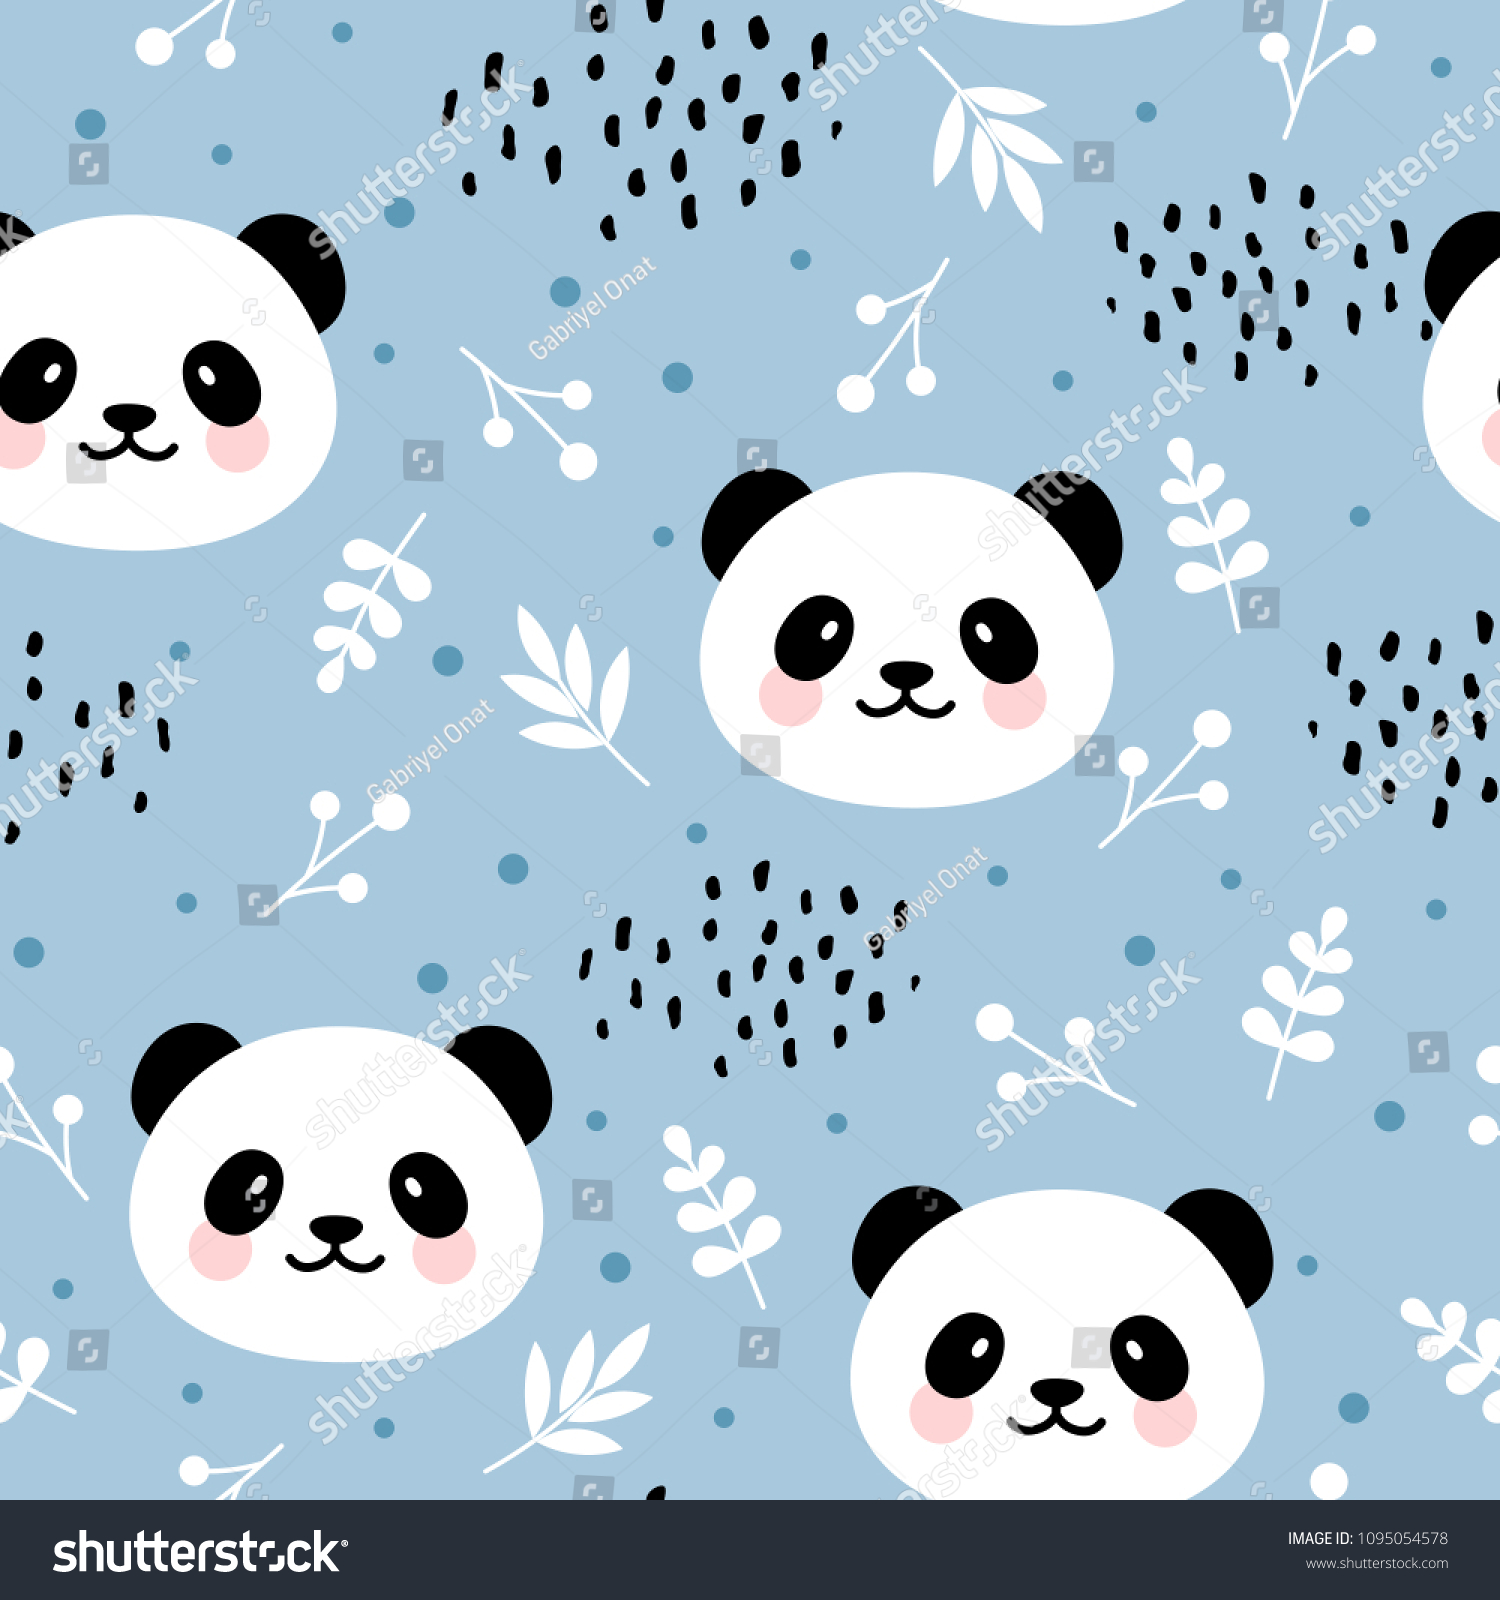 SVG of Cute panda seamless pattern, hand drawn forest background with flowers and dots, vector illustration svg